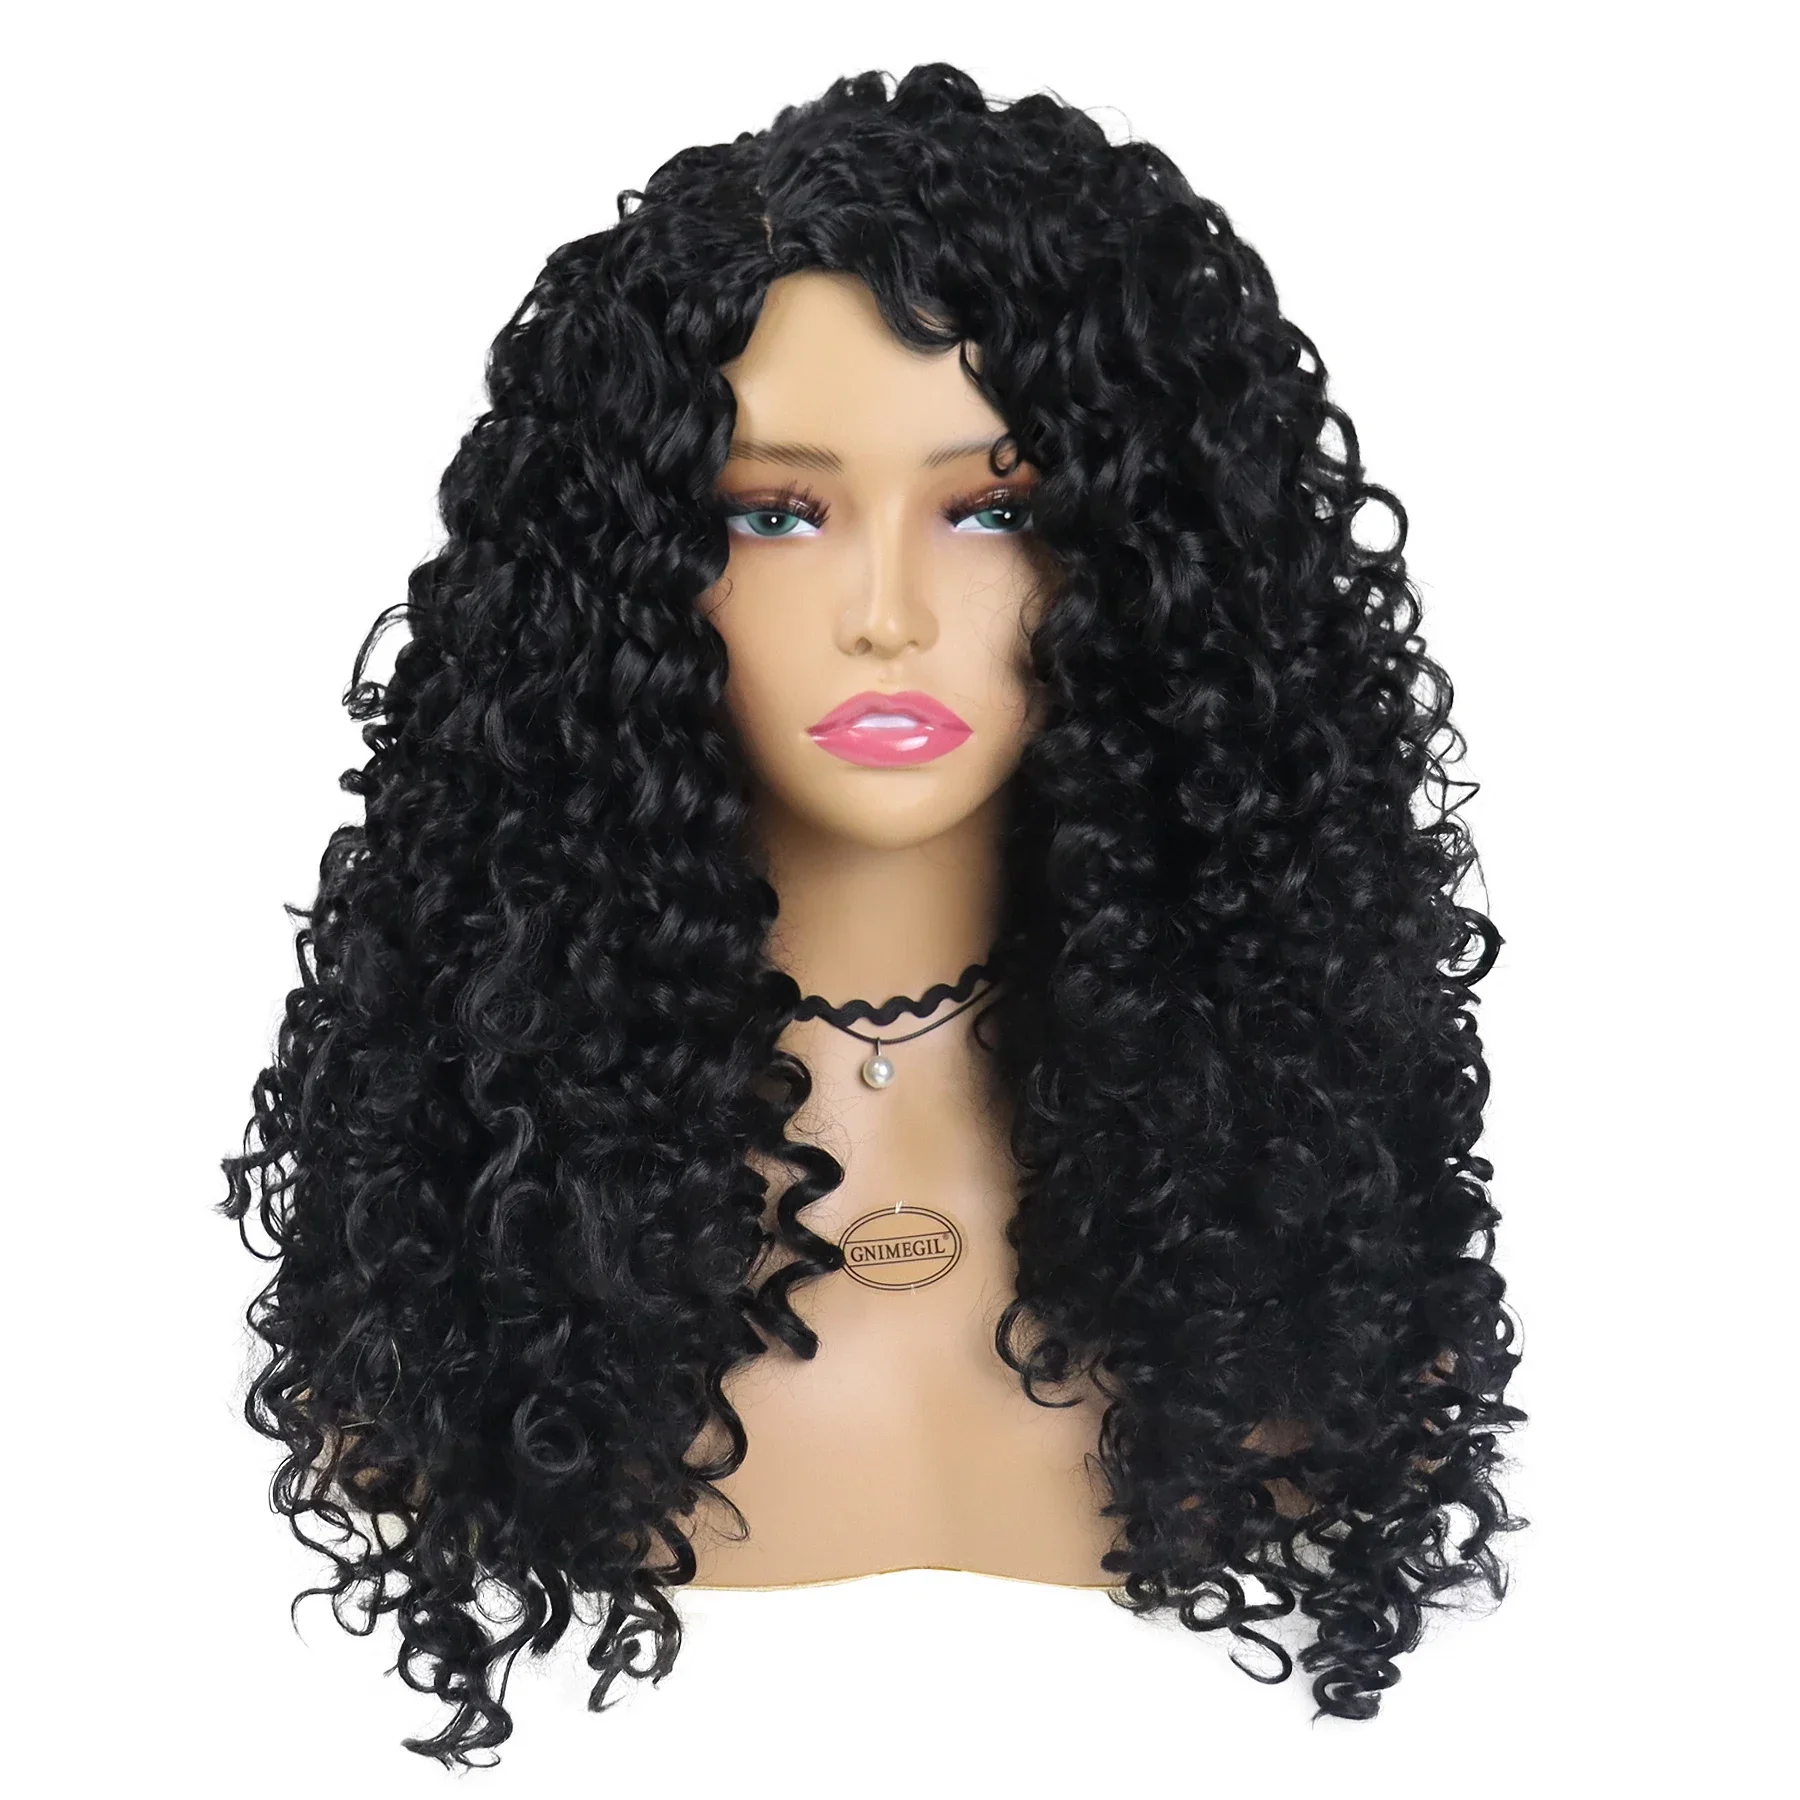 GNIMEGIL Synthetic Long Curly Wig for Woman Big Volume Fluffy Wave Wigs for - £31.06 GBP